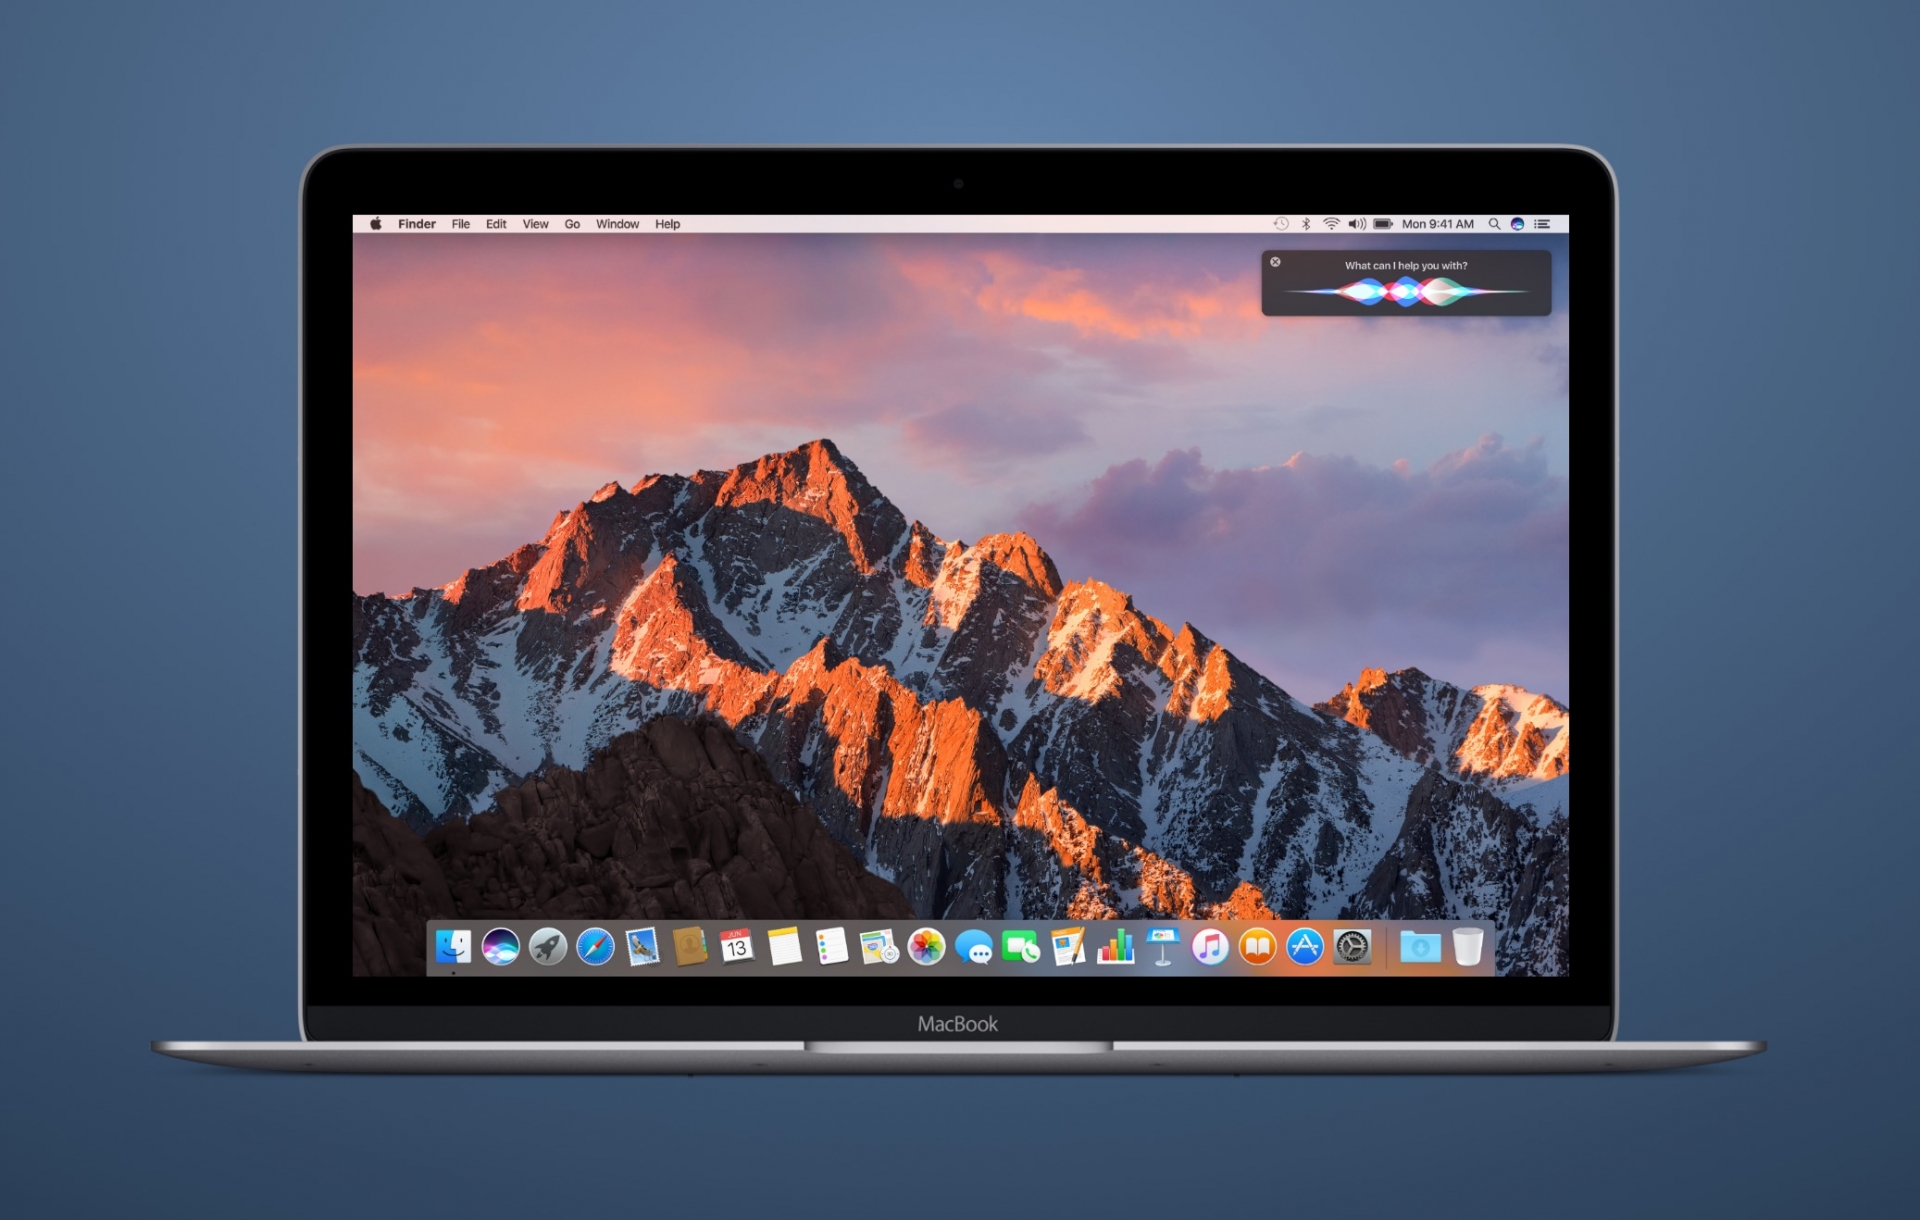 Apple Released macOS Sierra 10.12.2 Beta 6 to Public and Developers